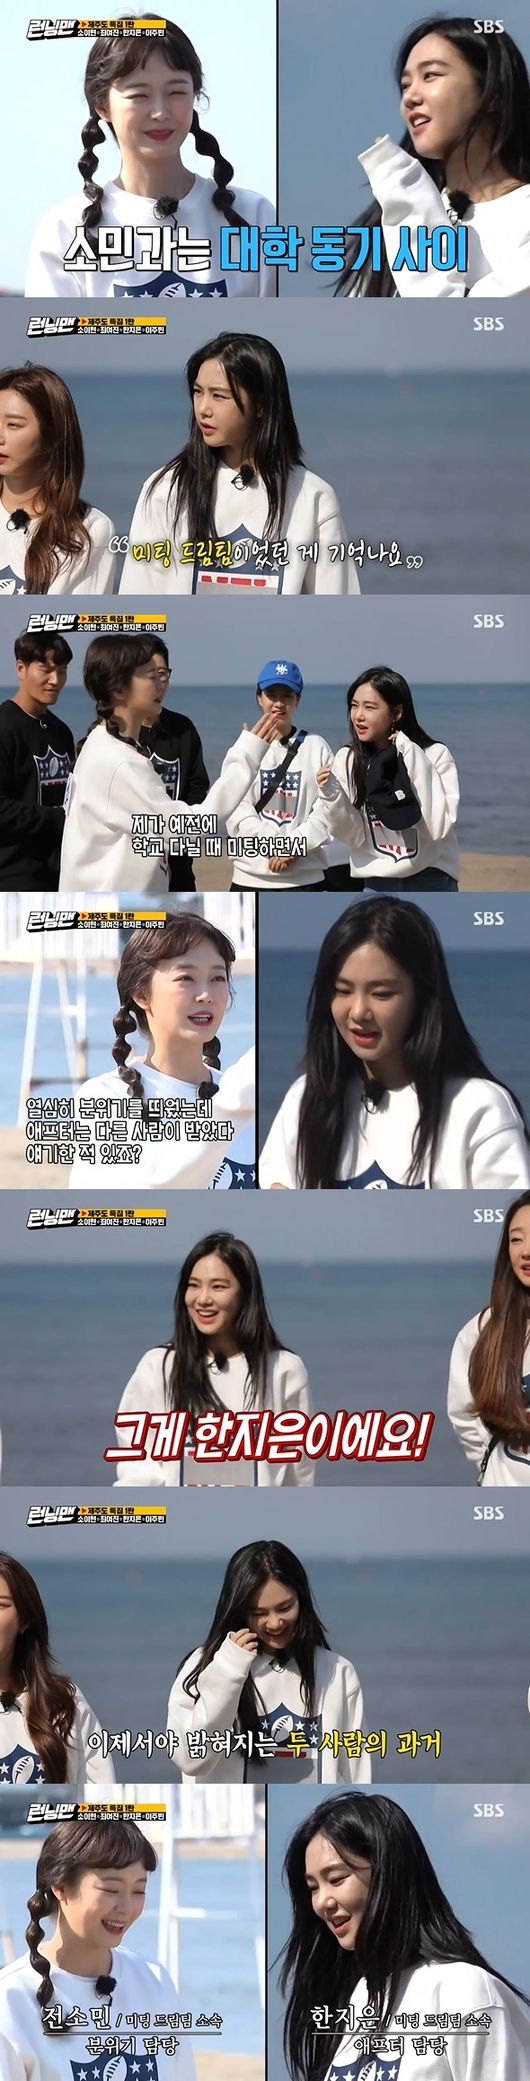 Jeon So-min has unveiled a meeting episode with University Motive Han Ji-eun.On SBS Running Man broadcasted on the afternoon of the afternoon, Jeon So-mins University motivation Han Ji-eun appeared and the past of the two people was revealed.Han Ji-eun was featured in the JTBC drama Meloga Constitution which was broadcast last year.Han Ji-eun replied I dont know when asked what kind of Friend was it? between Jeon So-min and University motives.Jeon So-min also replied: Not clear - something is not cleaner than that - there was a man woven between Friends.I dont know how far to talk about it because its my first time in the arts, I remember it was a meeting dream team, said Han Ji-eun, who said: There was a builder there...Oh!I thought of it, he shouted.Jeon So-min said: I had a hard time meeting when I was in school before, and after I got the After, someone else got it, thats Han Ji-eun.I floated the atmosphere and said, You have passed it all over, but after I received another person. Han Ji-eun laughed, saying, Somin was close to me, and Jeon So-min was upset that the game was all about the atmosphere.Haha said, You were Yoo Jae-Suk and Ji Suk-jin said, You should not lead all of them. Jeon So-min added, The atmosphere was good that day.Running Man screen captures